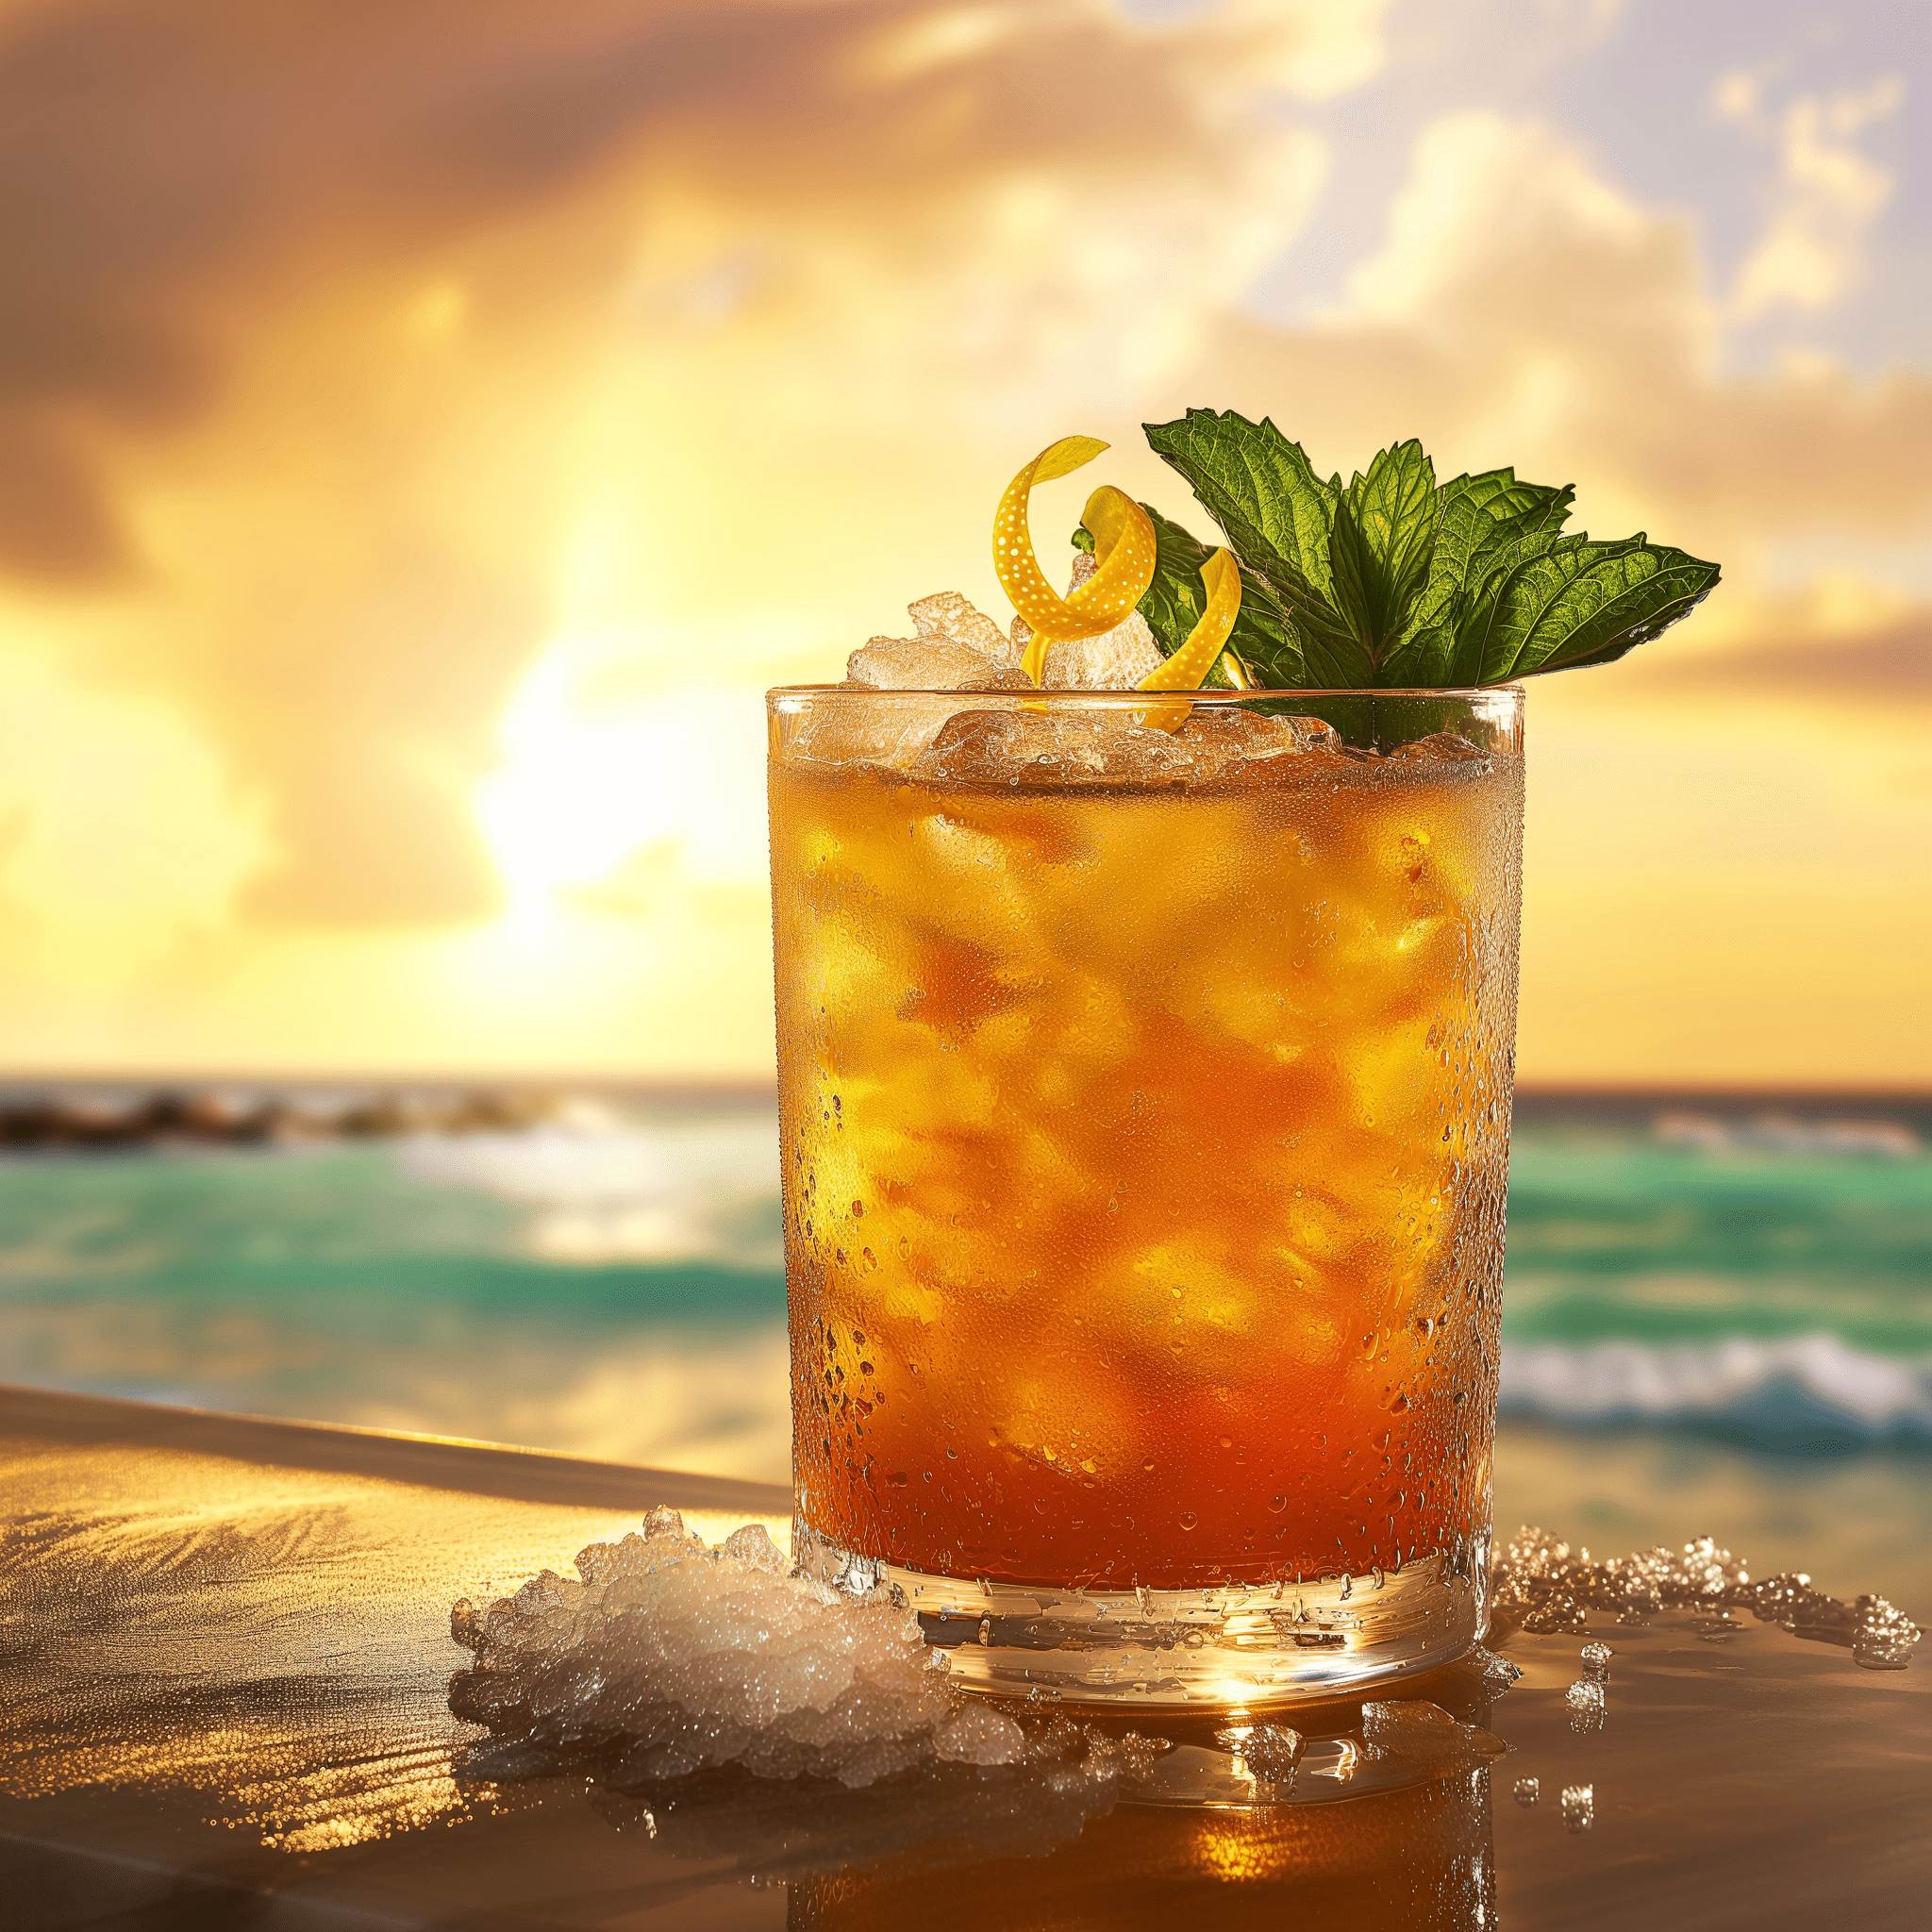 Grand Smash Cocktail Recipe - The Grand Smash offers a harmonious blend of sweet and tart flavors, with a robust orange note from the Grand Marnier. The muddled mint adds a refreshing herbal undertone, while the lemon wedges provide a zesty kick. It's a full-bodied cocktail with a lingering, sophisticated finish.